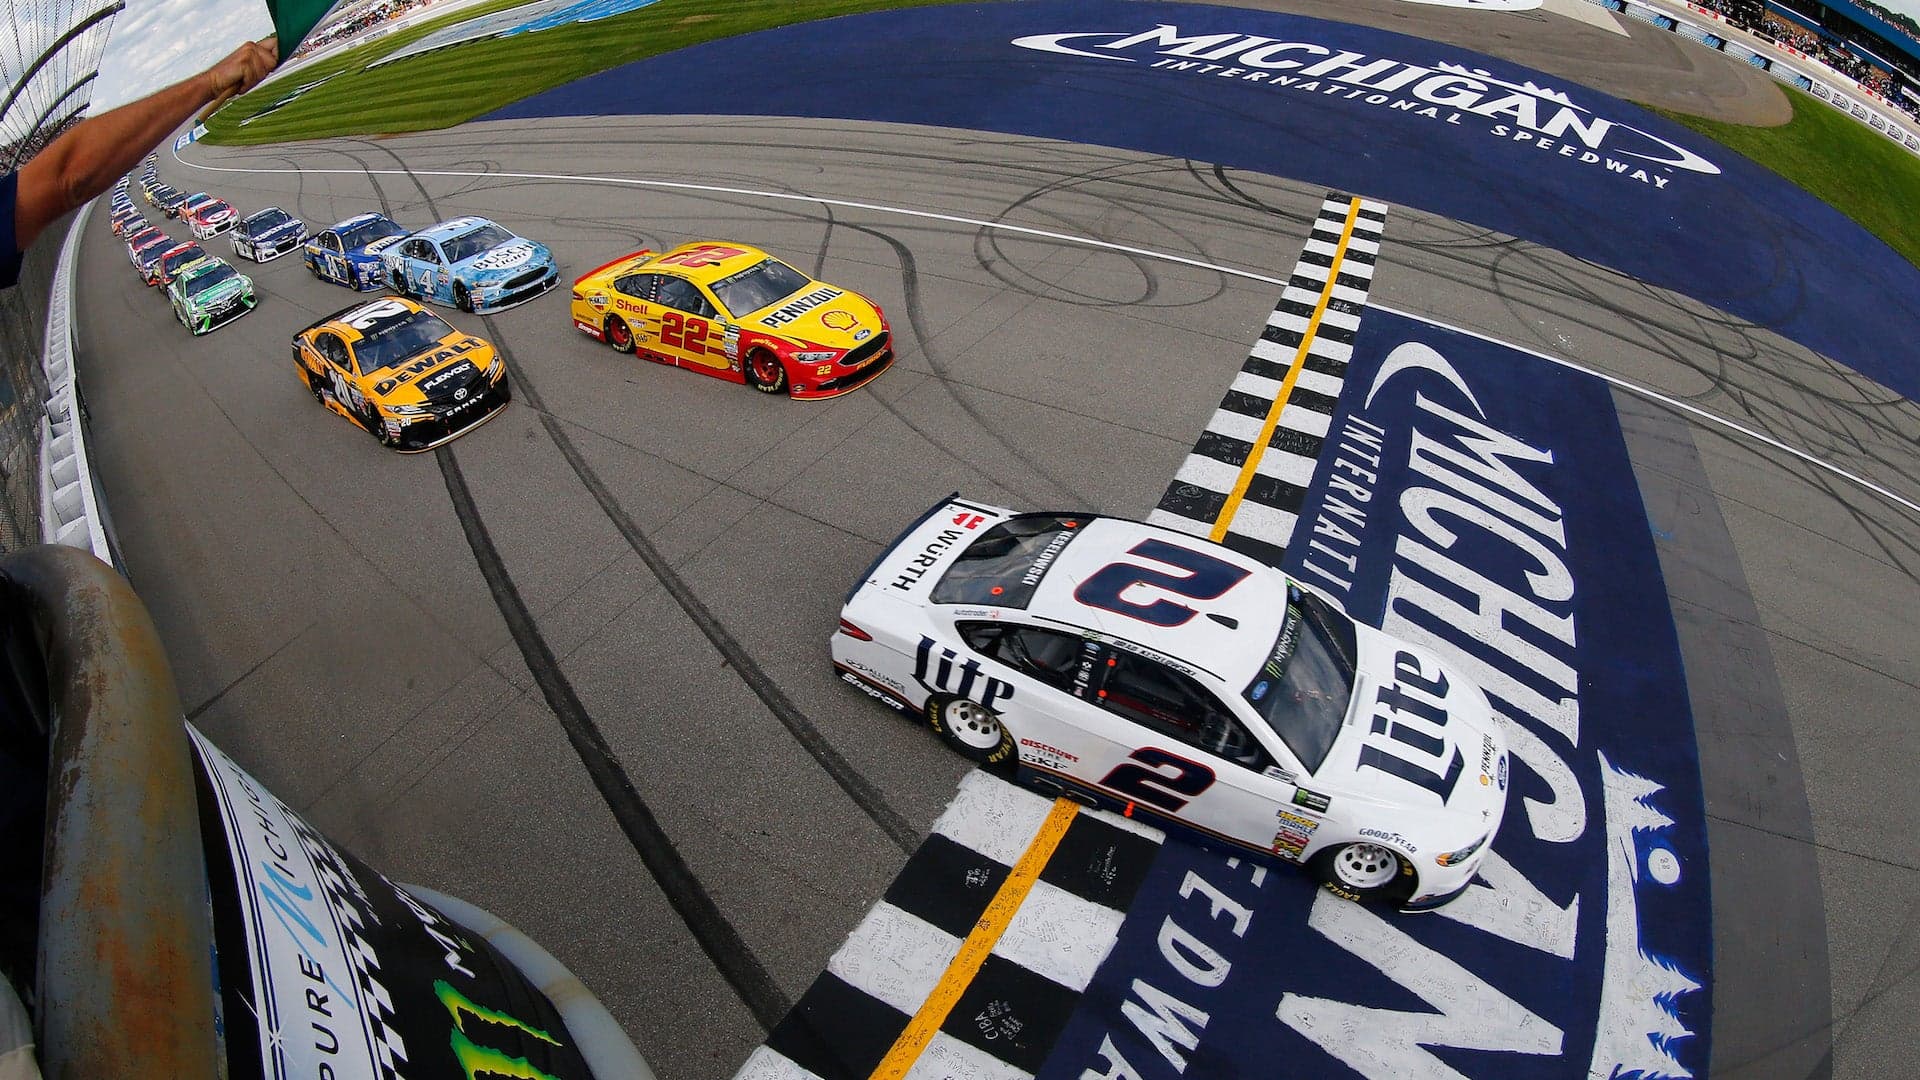 Goodyear Prepares for NASCAR Races at Michigan by Holding Two-Day Test